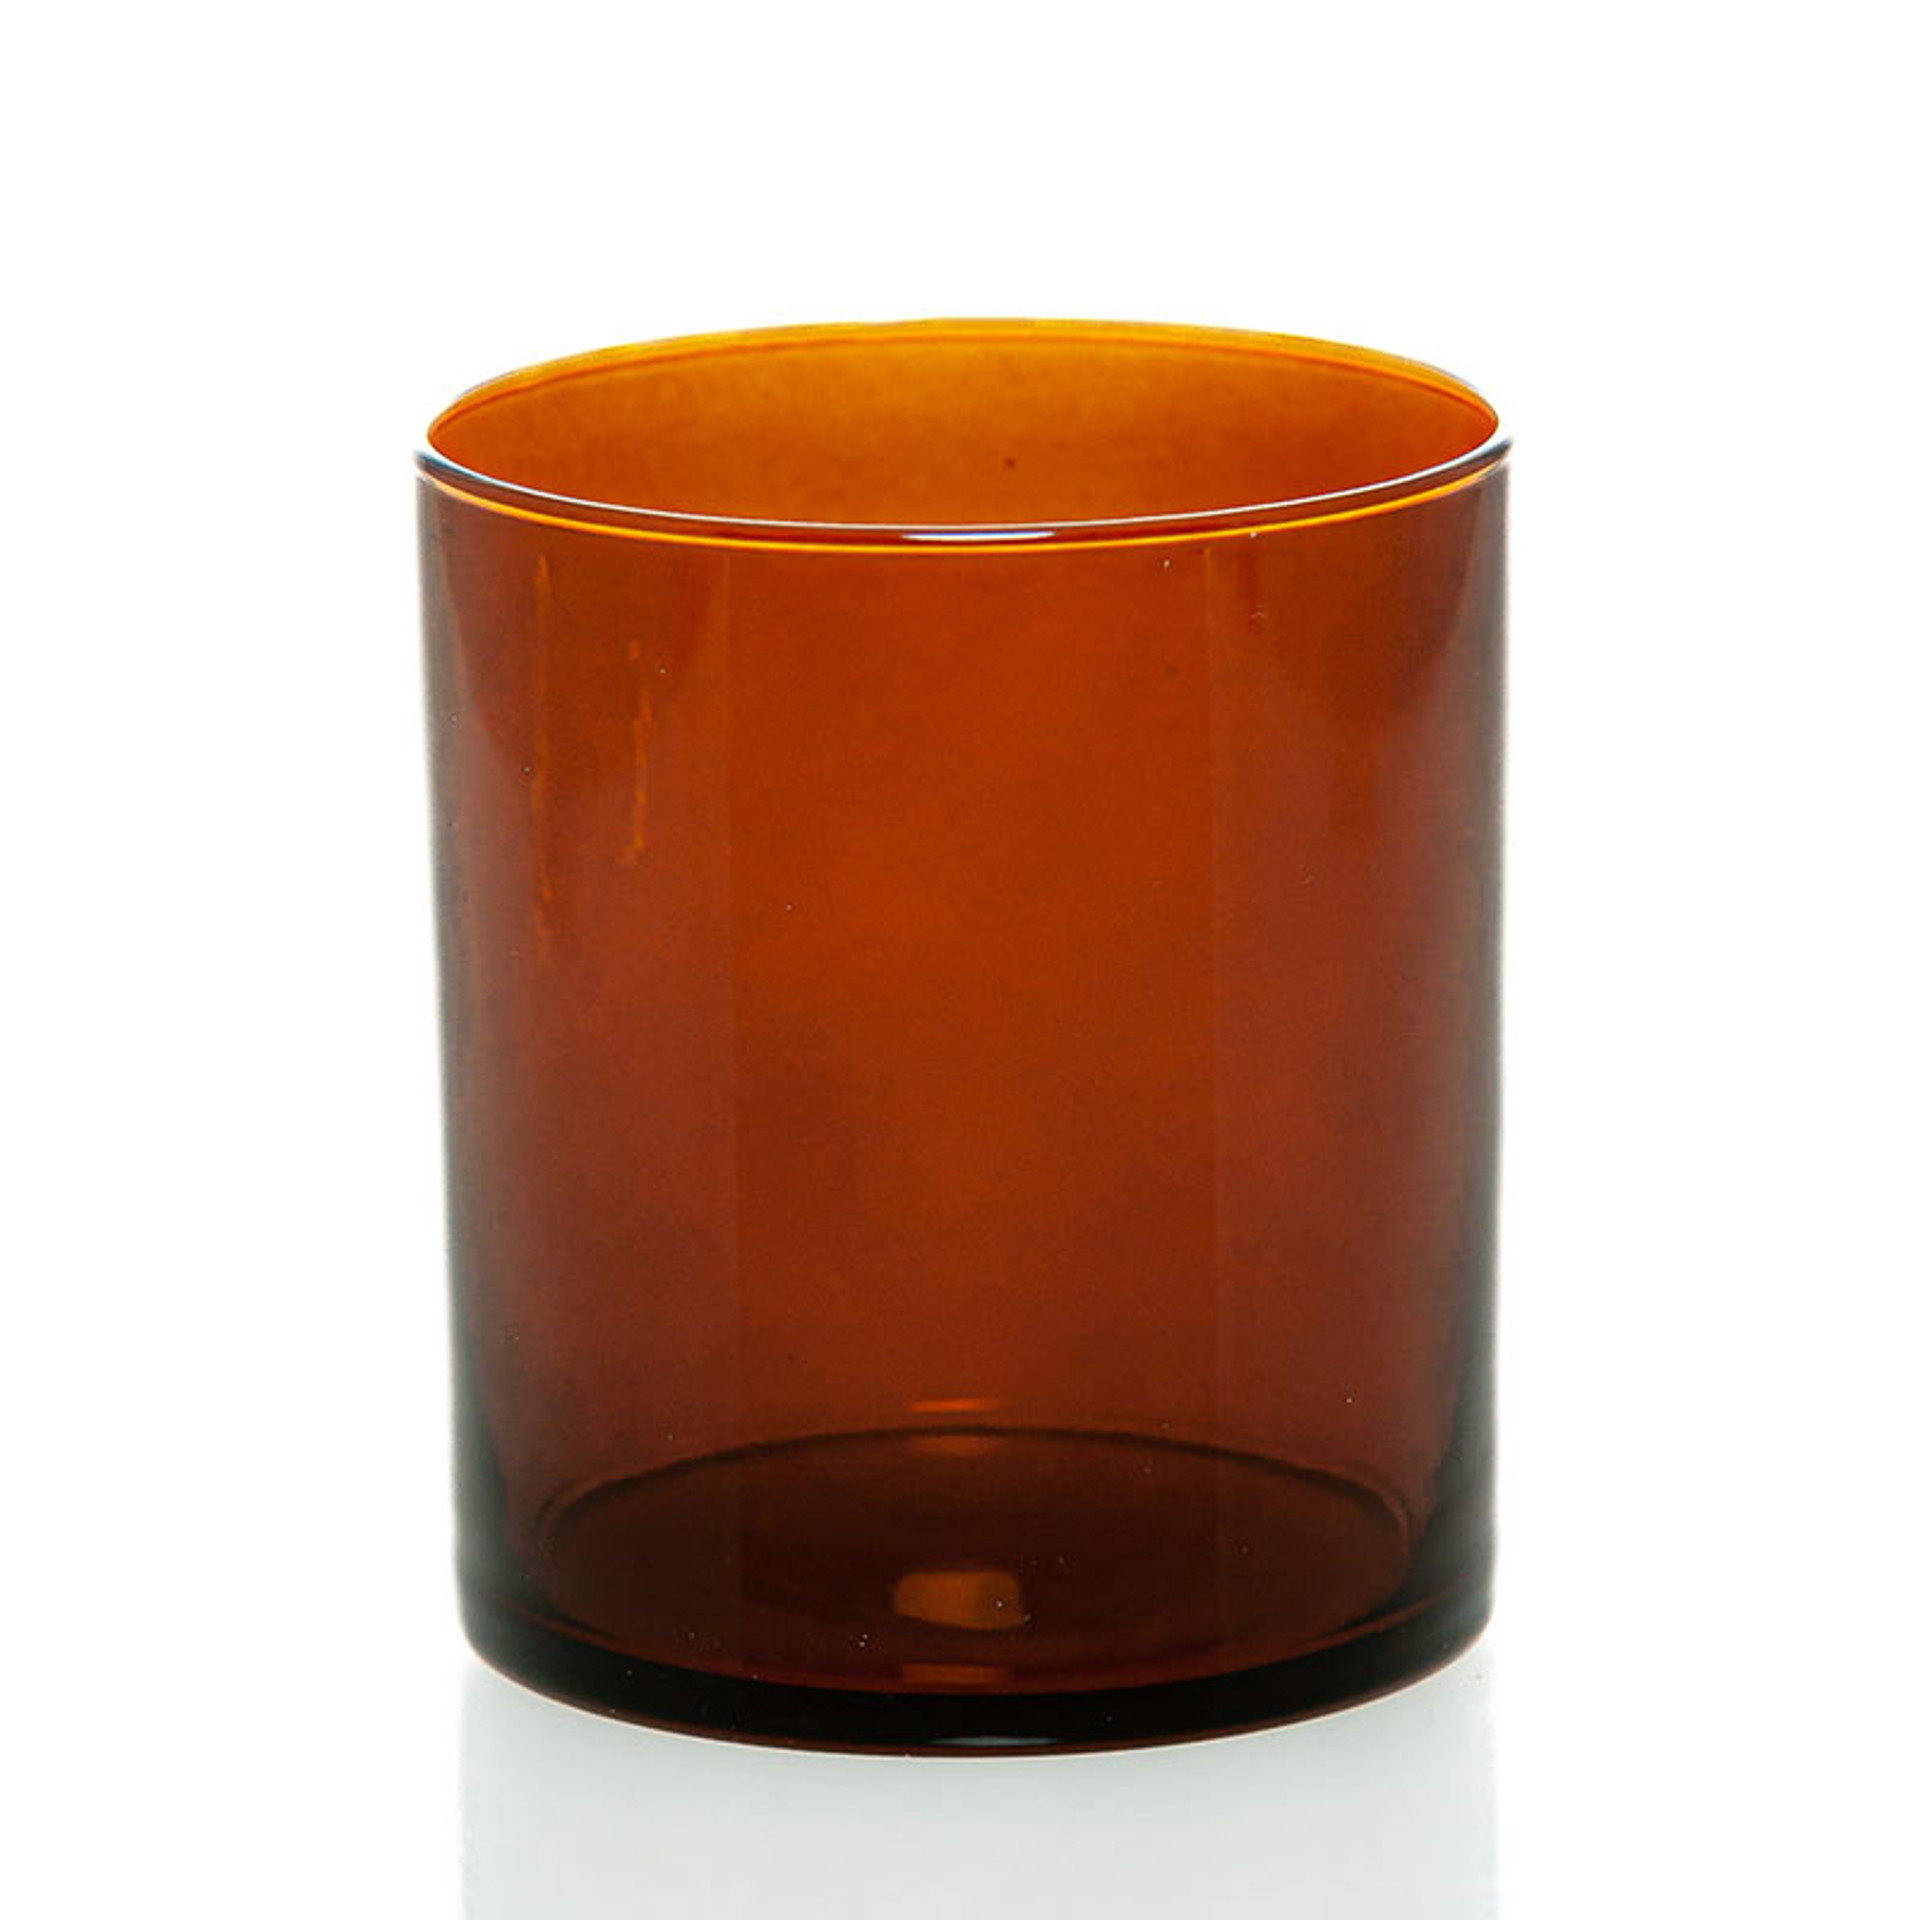 2917 - 12.5 oz. Libbey Candle Container